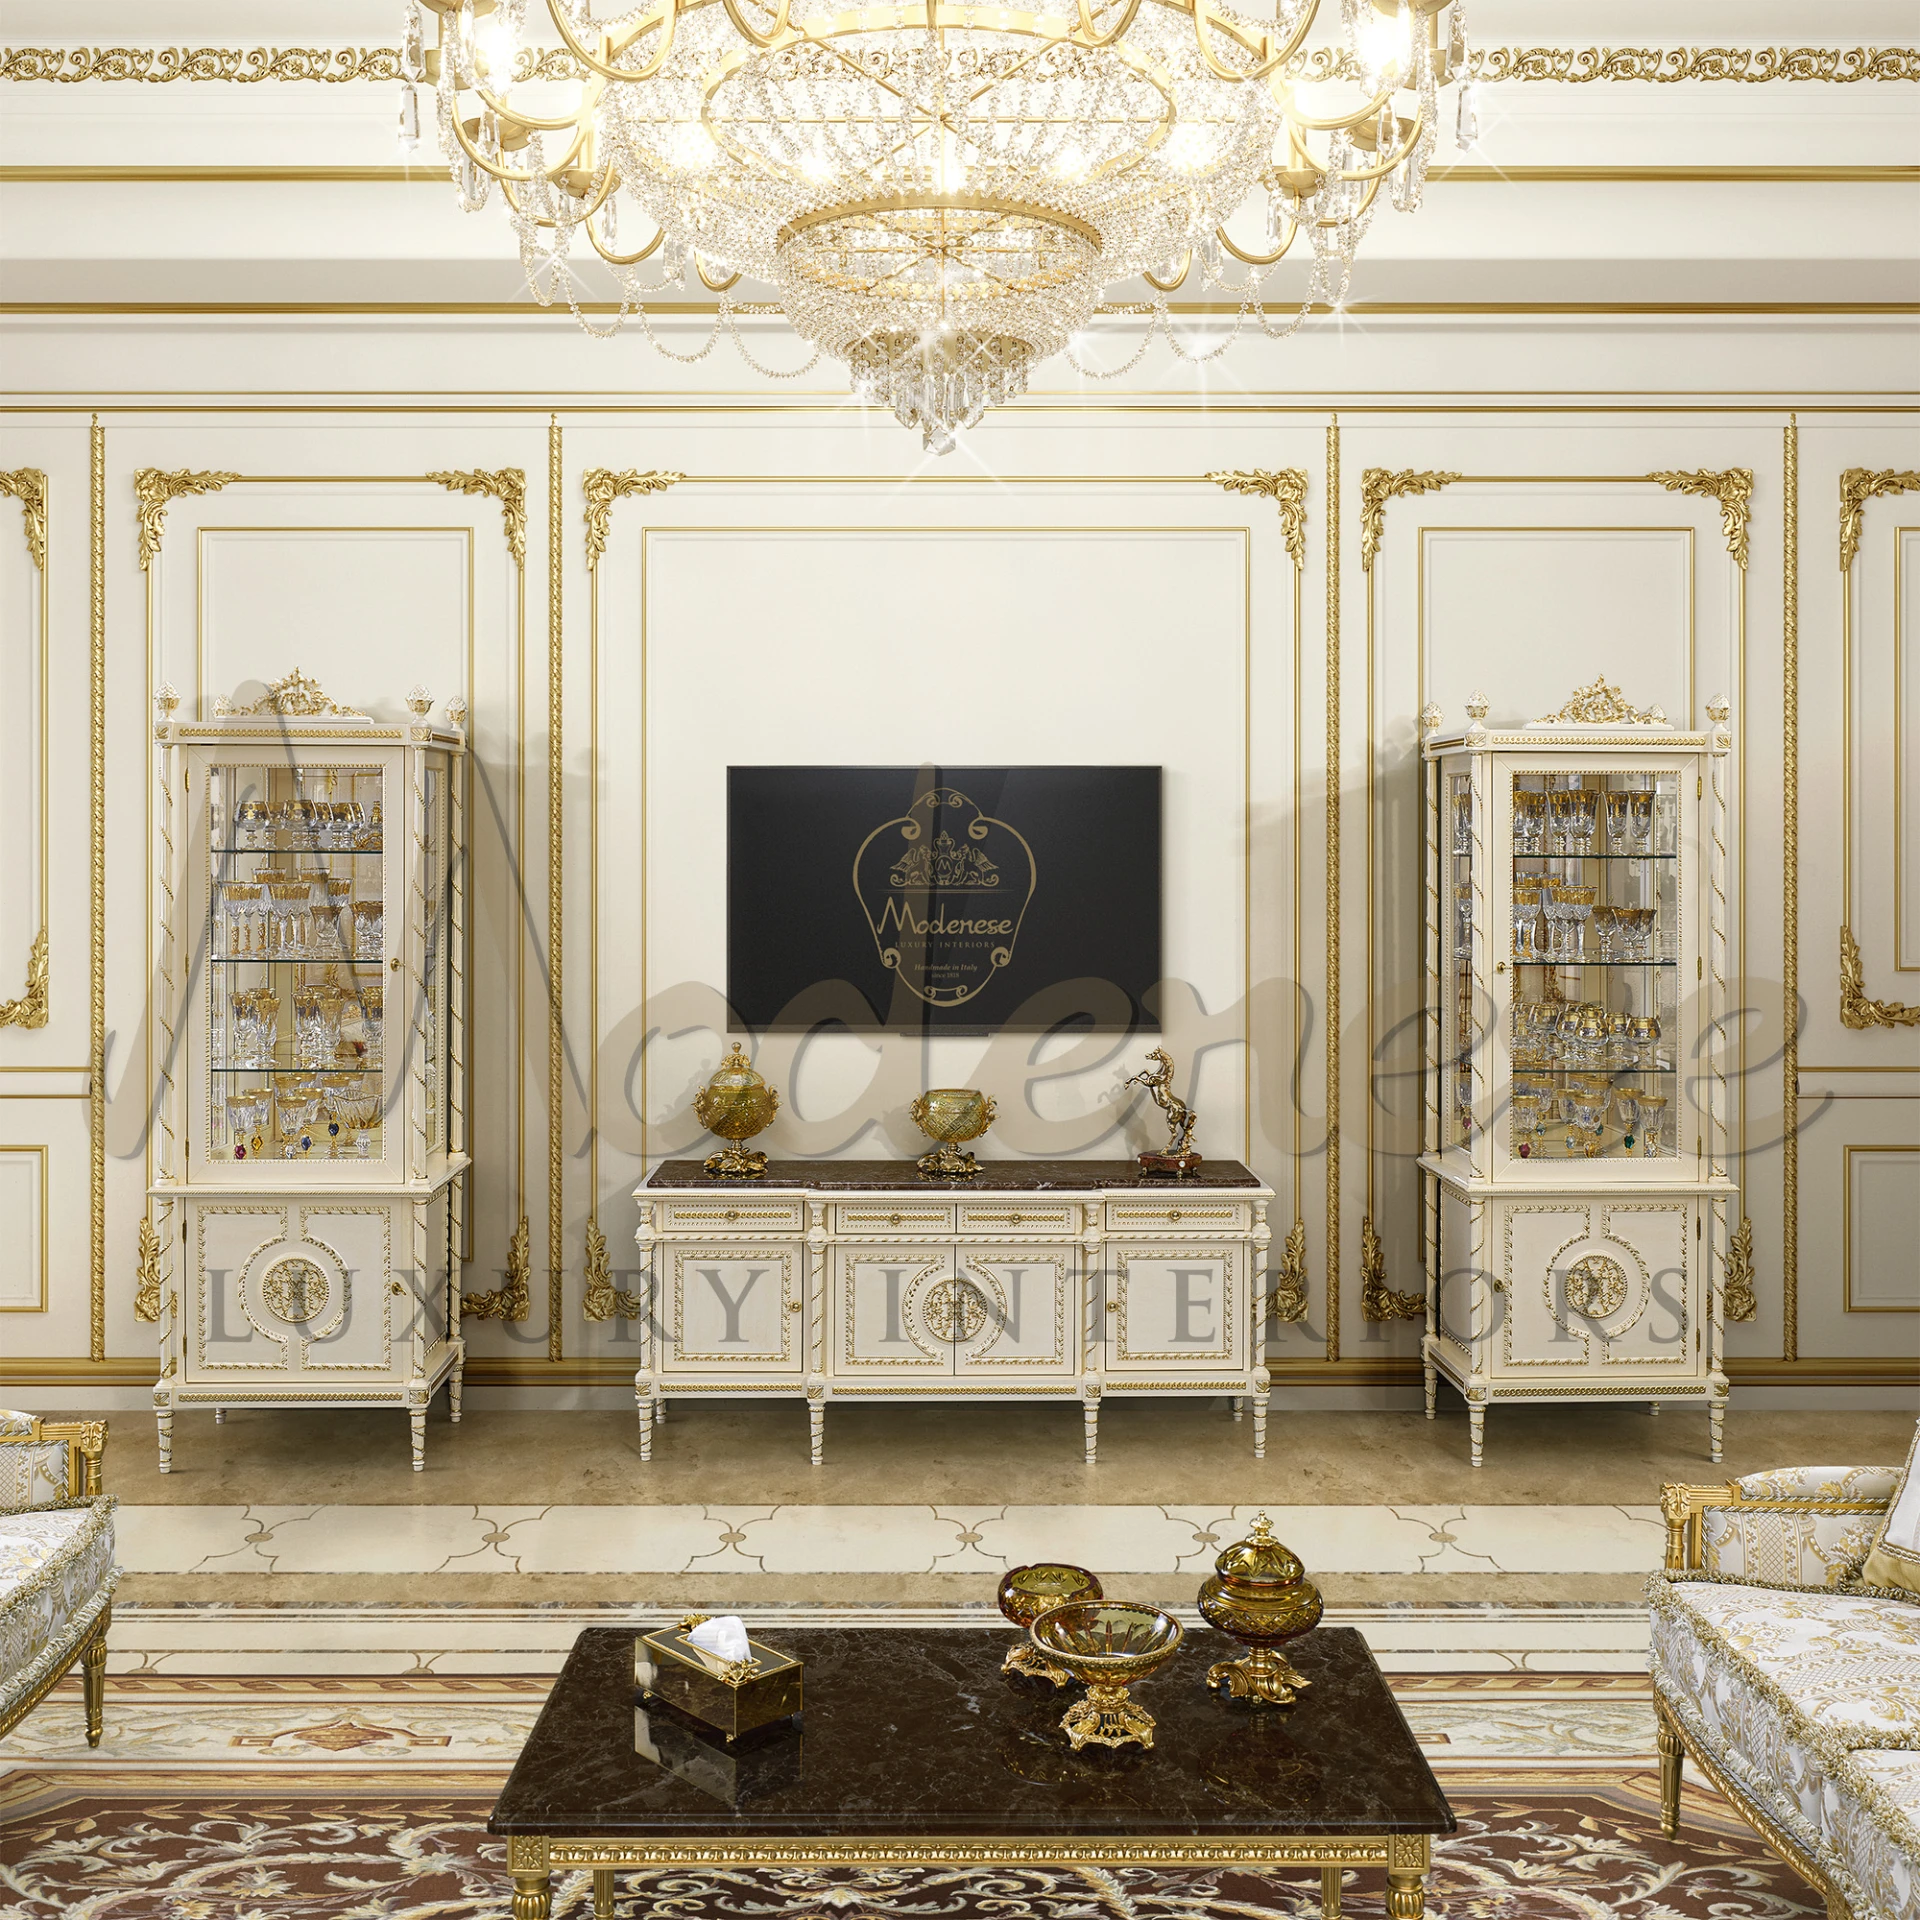 Classic Italian architecture meets modern comfort in this lavish living space.